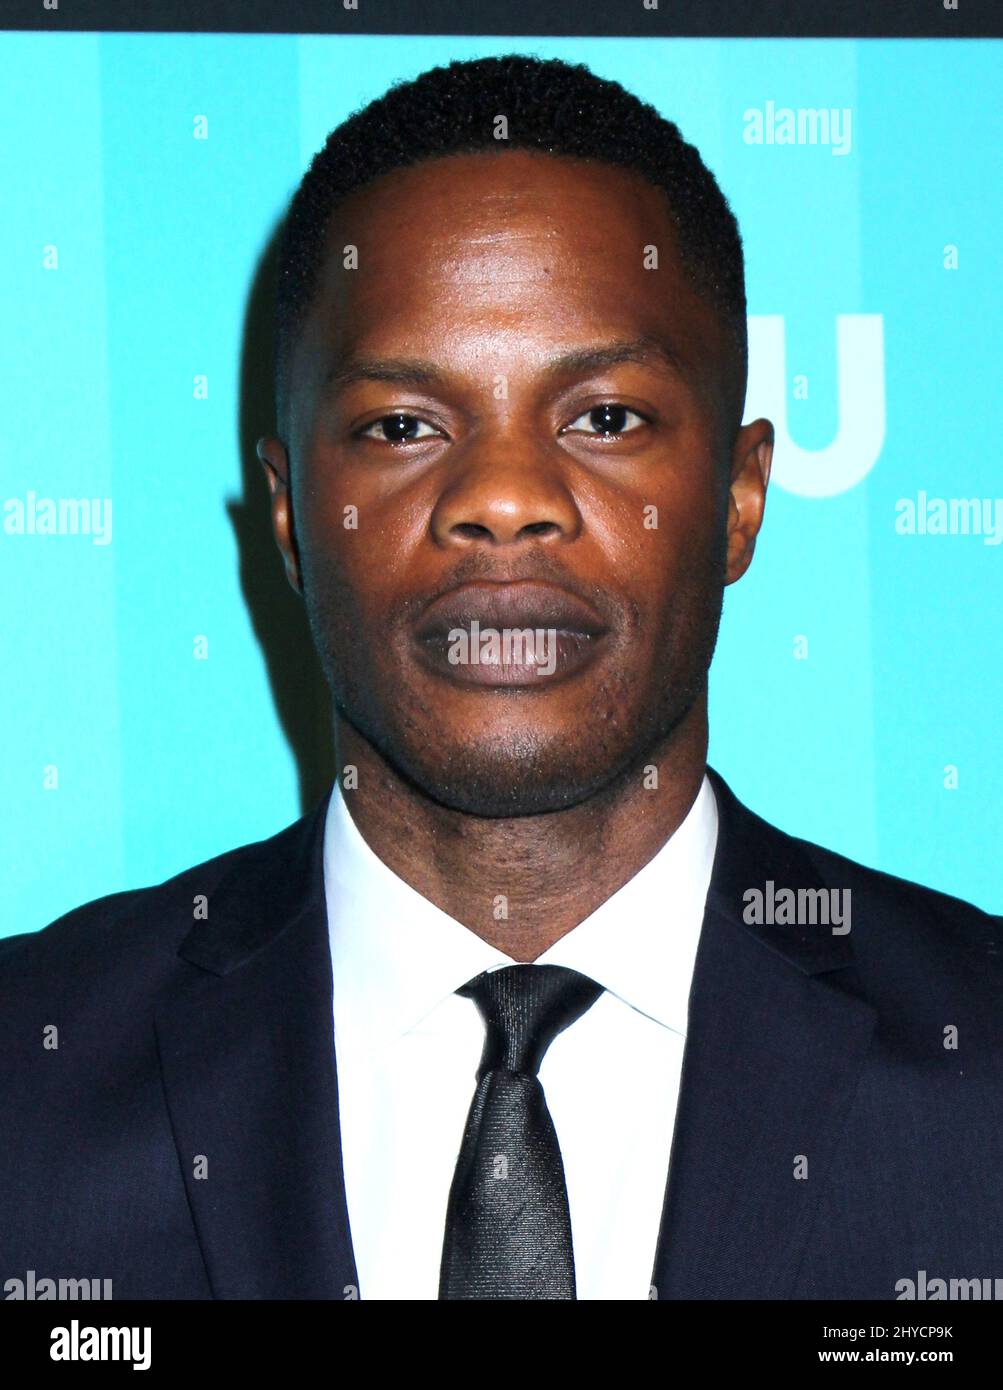 Sam Adegoke attending The CW Network's 2017 Upfront held at The London Hotel on May 18, 2017 Stock Photo